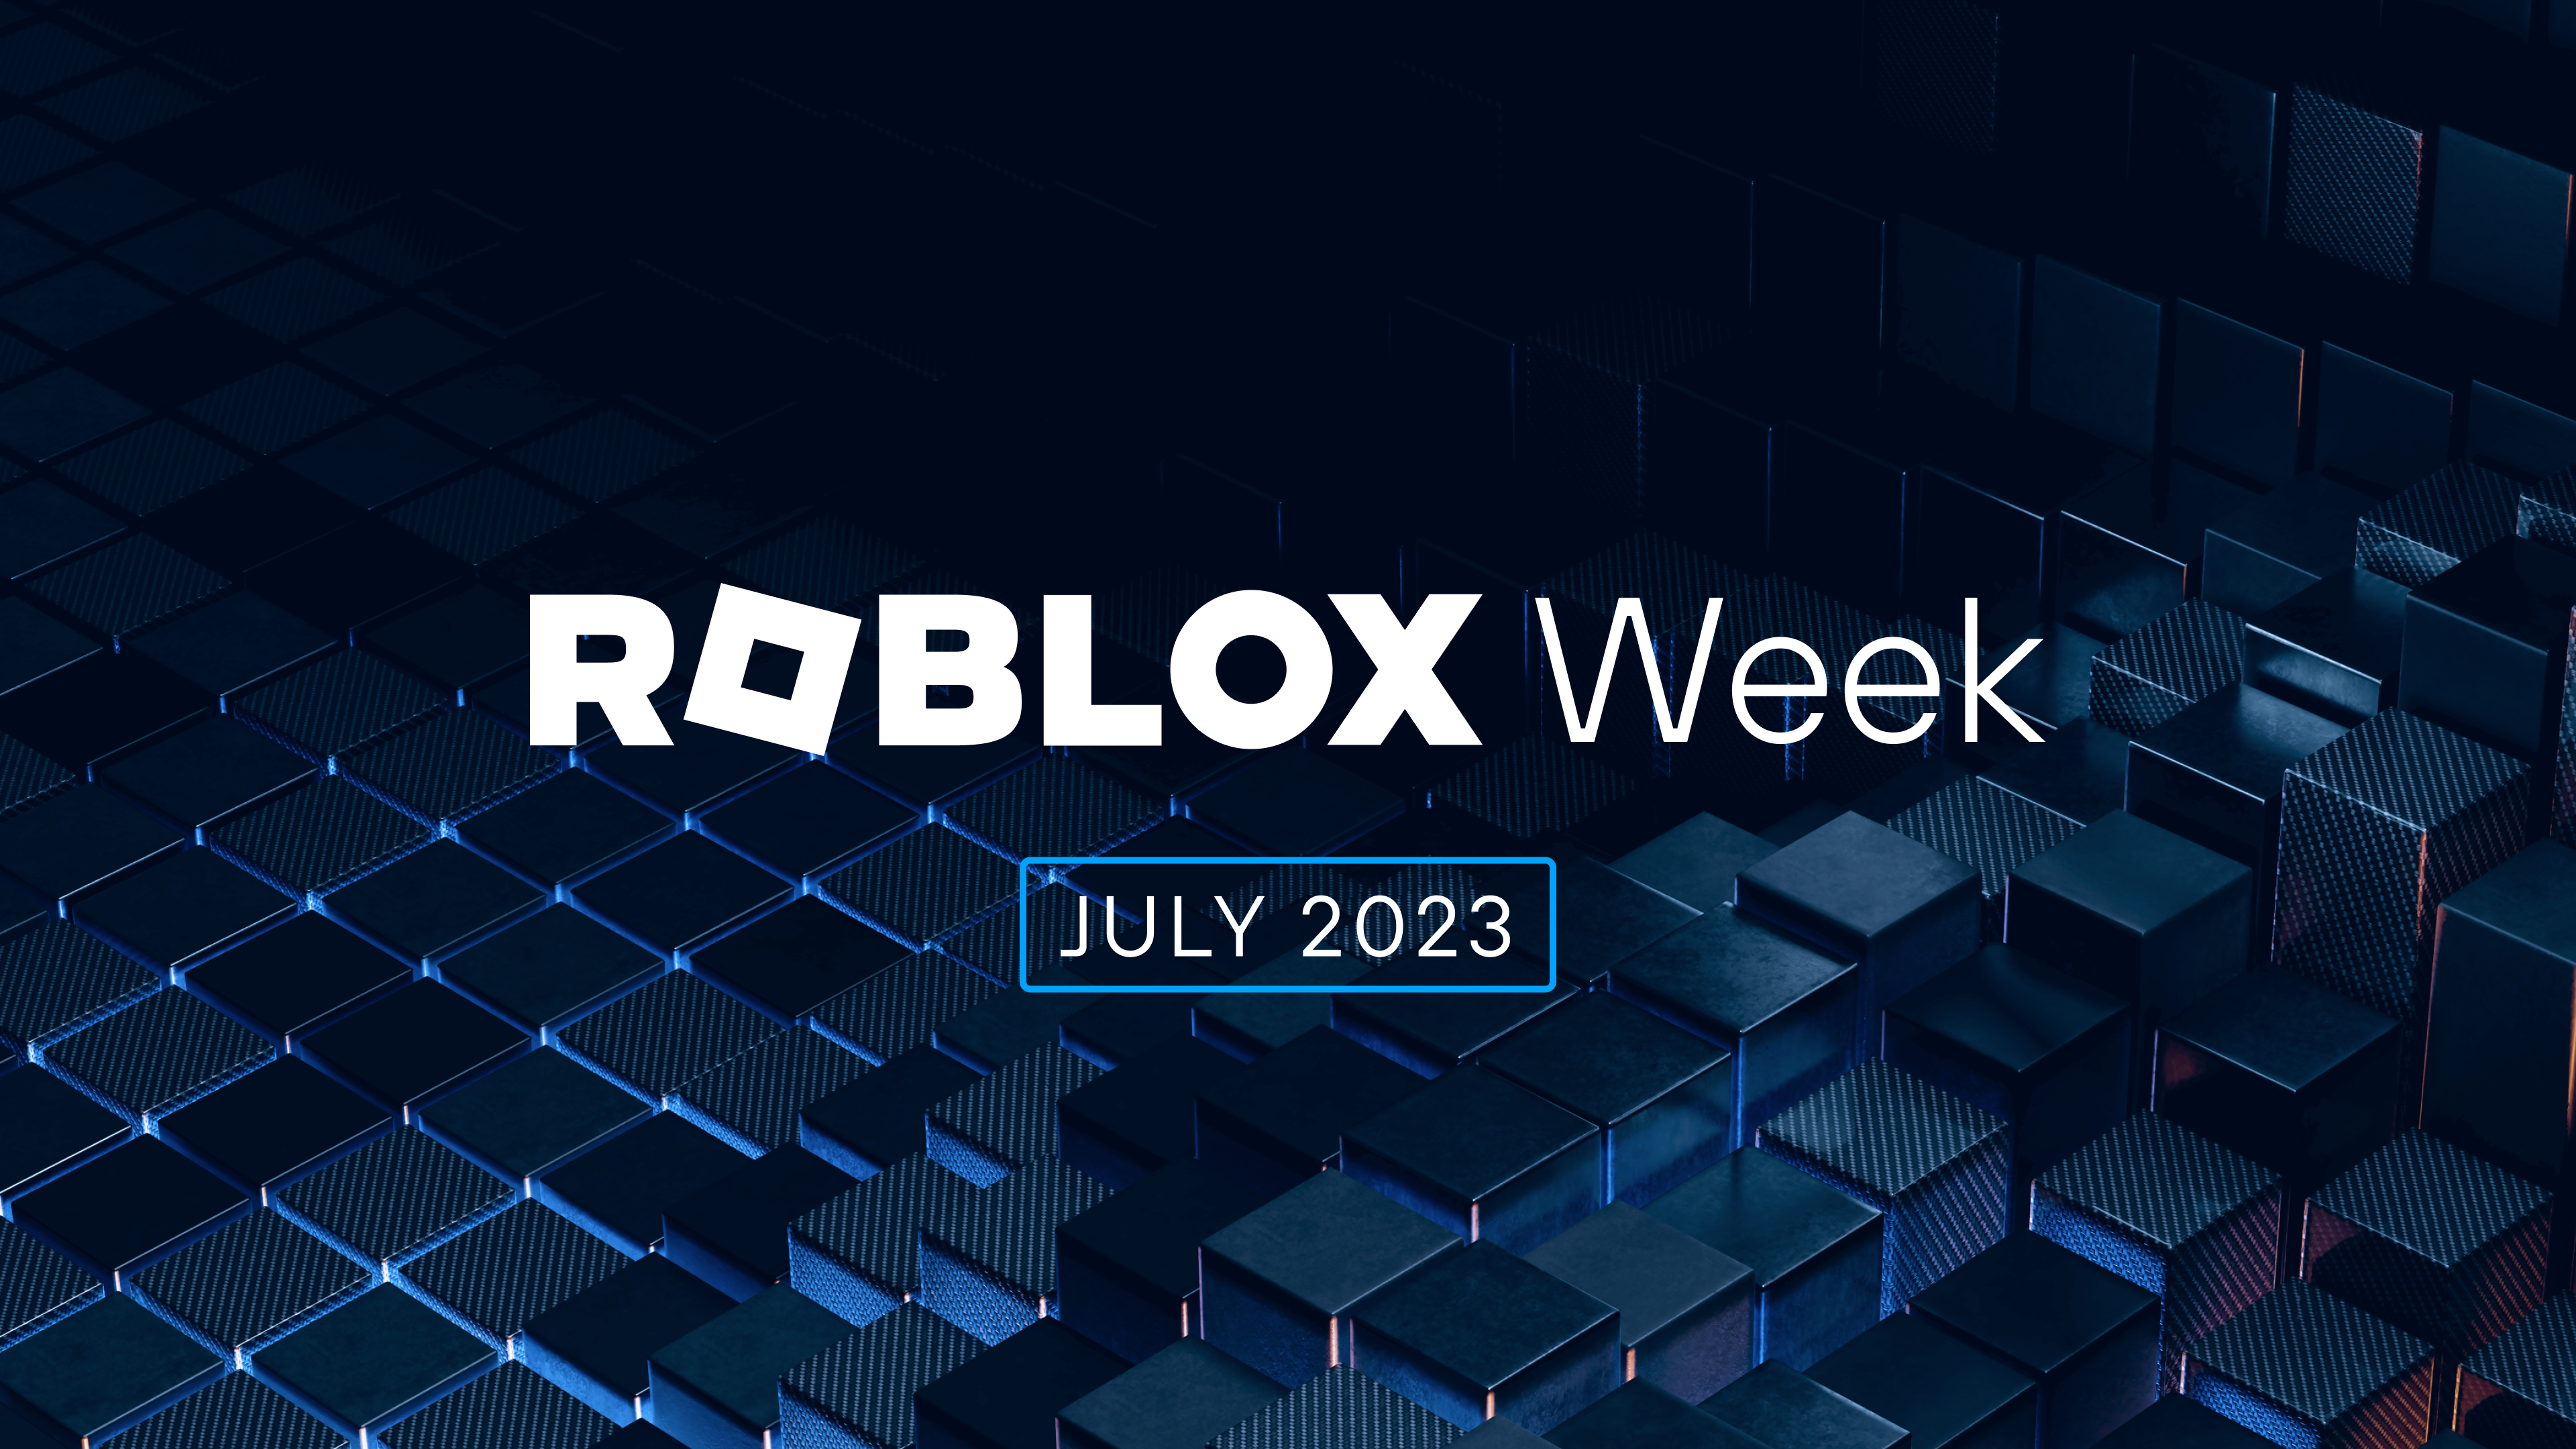 We recently held our third Roblox Week at headquarters in San Mateo. This semi-annual event brings our employees together to connect and collaborate as we drive innovation and pursue our shared vision of reimagining how people come together.